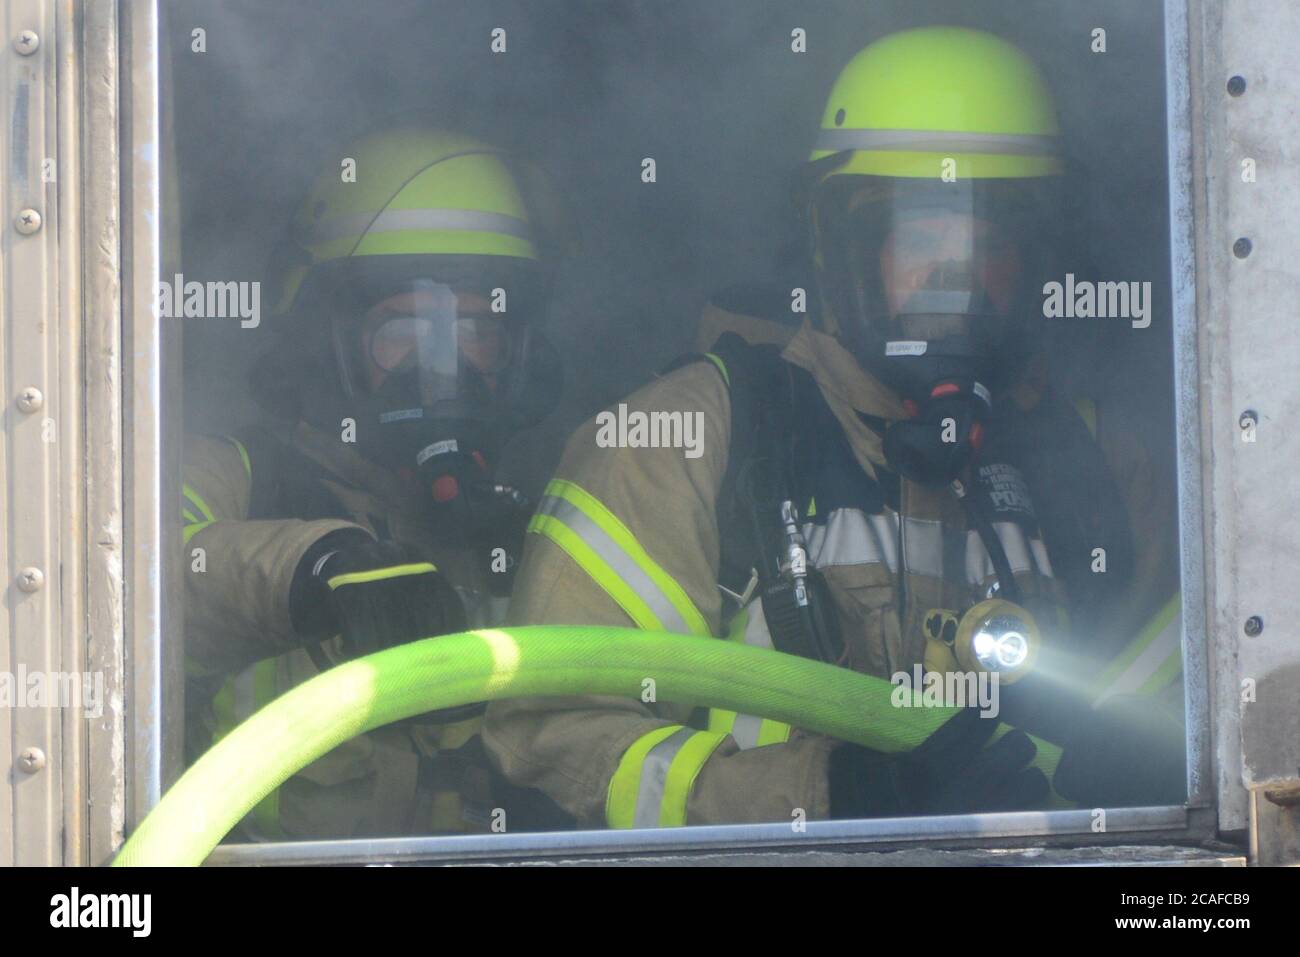 U.S. Army civilian firefighters from Stuttgart, Hohenfels, Kaierslautern and Grafenwoehr military installations, complete their annual firefighter certification training at the U.S. Army Fire Fighting Training Center in Ansbach, Germany, Aug. 6, 2020. (U.S. Army photo by Charles Rosemond) Stock Photo